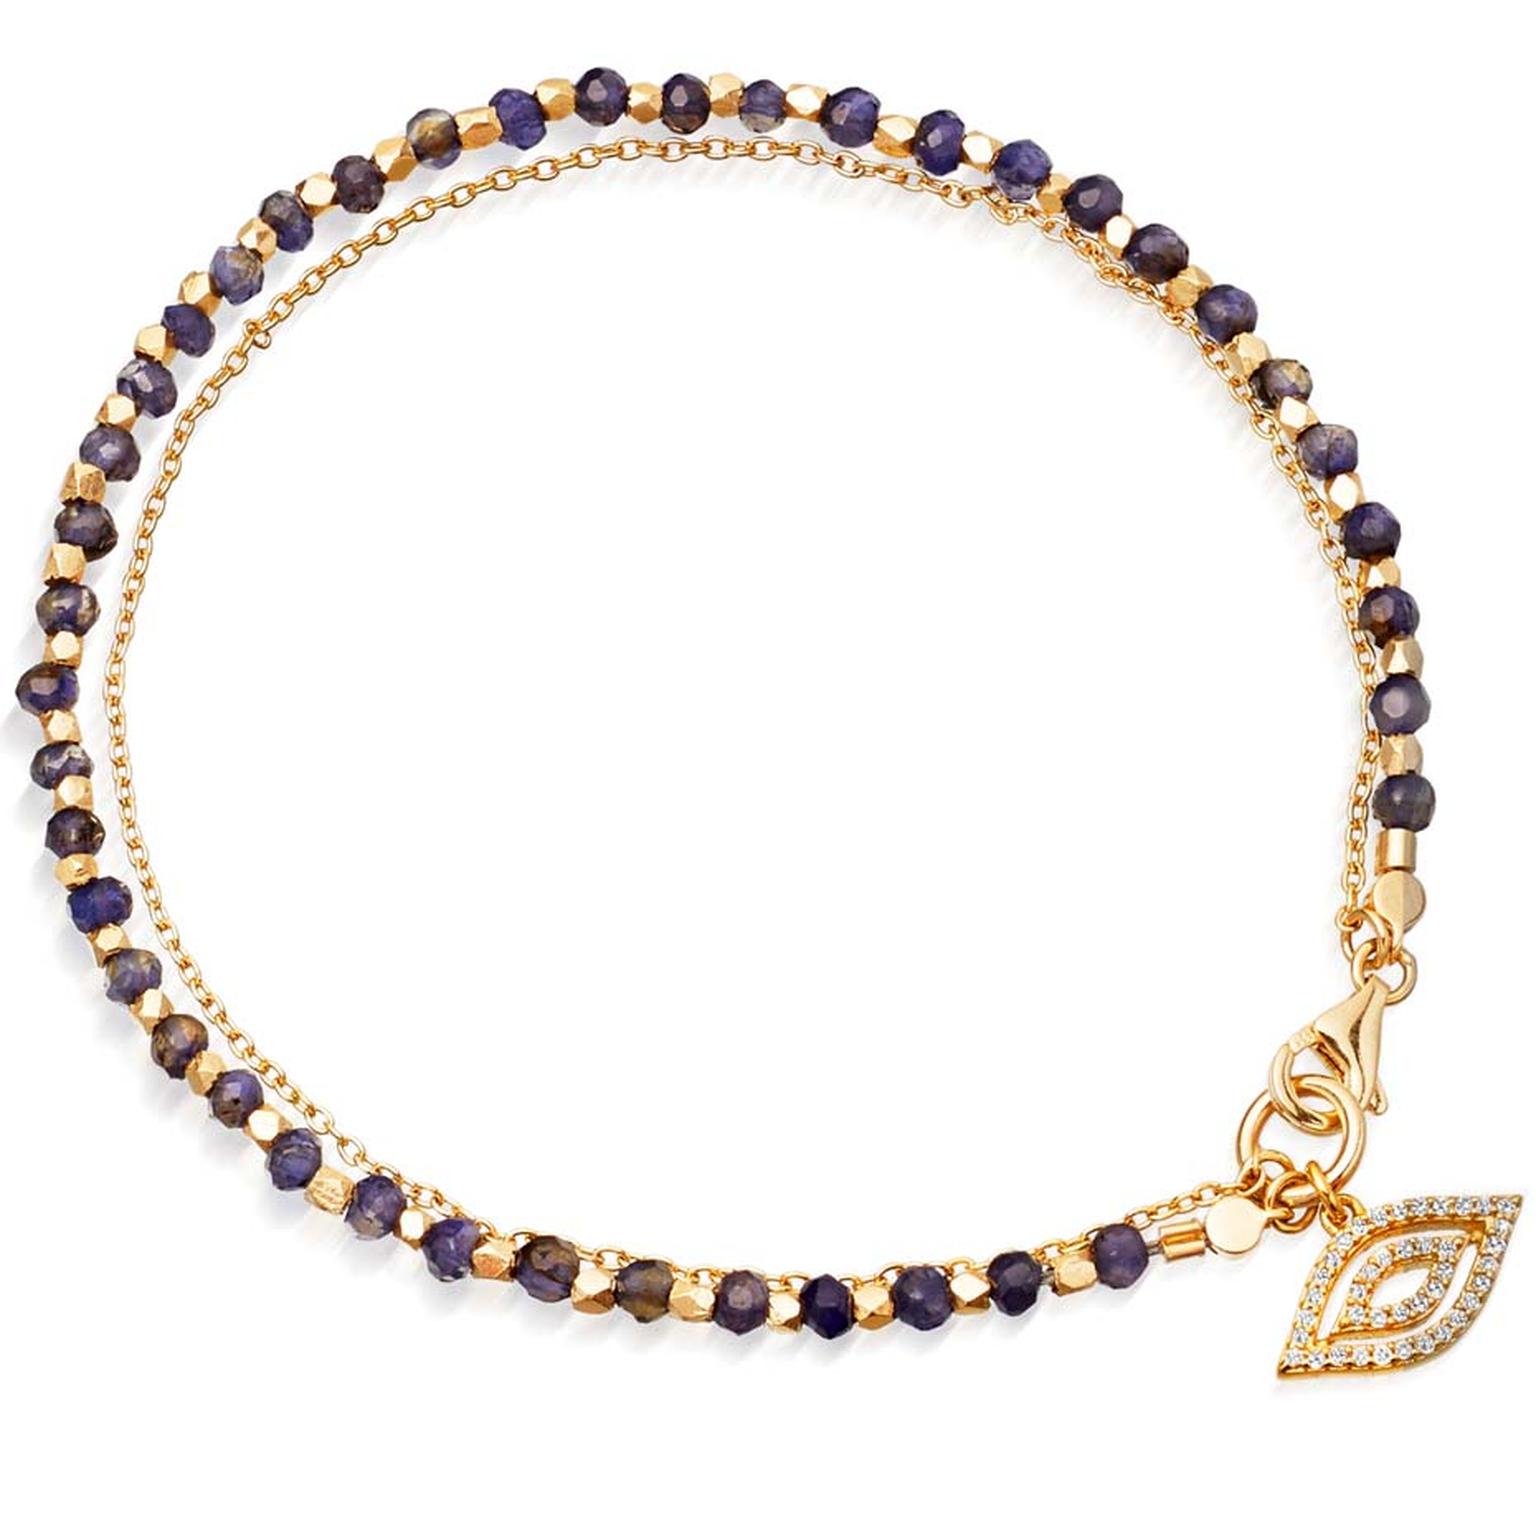 Astley Clarke incorporates its most iconic talismans into their fine biography collection, including this Sapphire evil eye bracelet.